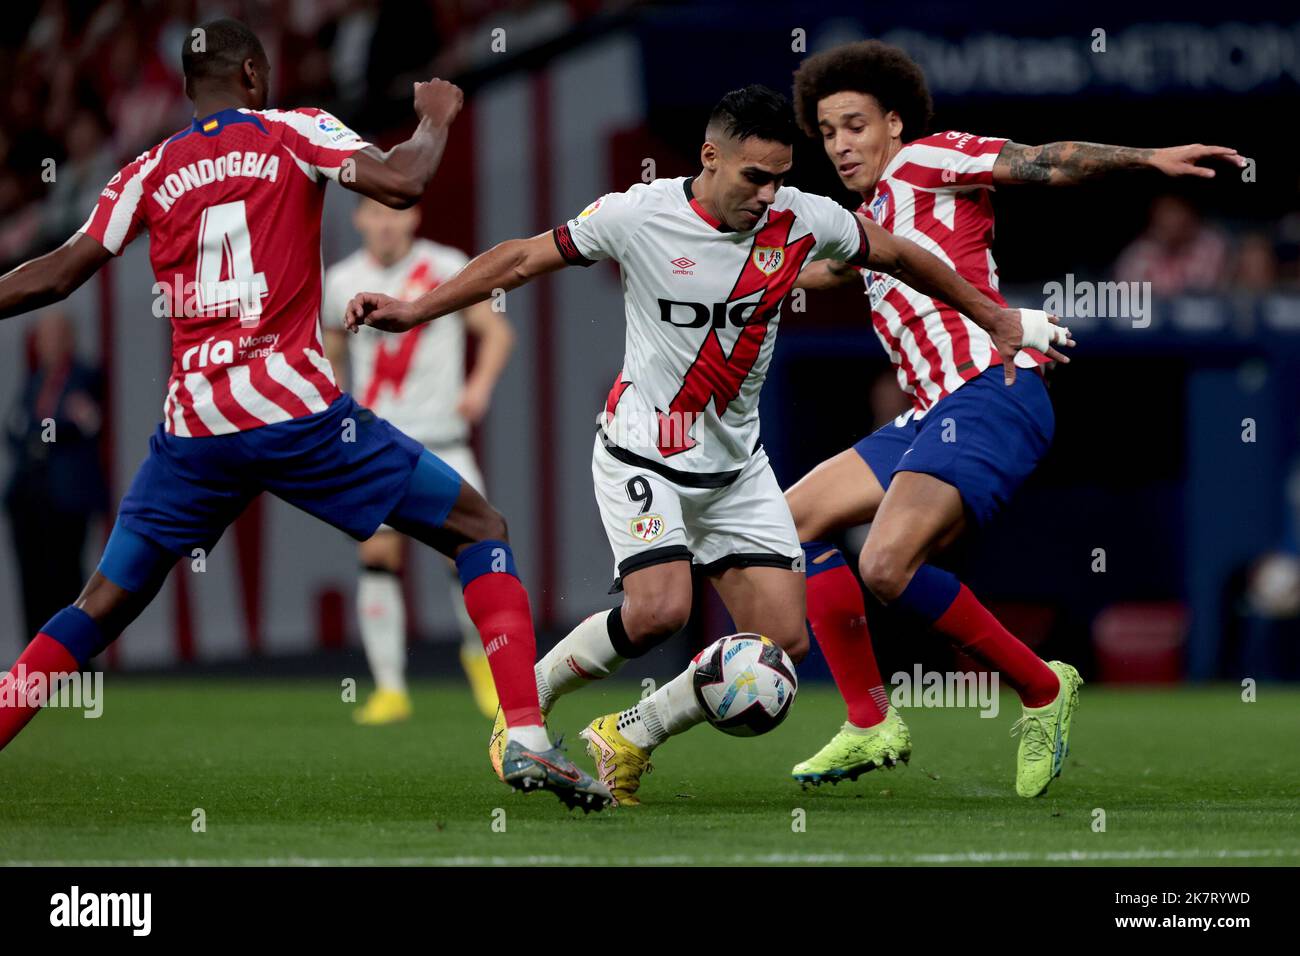 Madrid, Spanien. 18th Oct, 2022. Madrid Spain; 18.10.2022.- Atletico de Madrid players Kondogbia (L) and Witsel (R) crash with Rayo Vallecano player Radamel Falcao (C). Atlético de Madrid vs Rayo Vallecano Football match between Madrid teams from the Spanish League on matchday 10 held at Civitas Metropolitano Stadium to capital of the Kingdom of Spain and ended in a tie at 1. Atletico Madrid goal by Morata 20  Rayo Vallecano goal by Radamel Falcao 90 2' penalty Credit: Juan Carlos Rojas/dpa/Alamy Live News Stock Photo